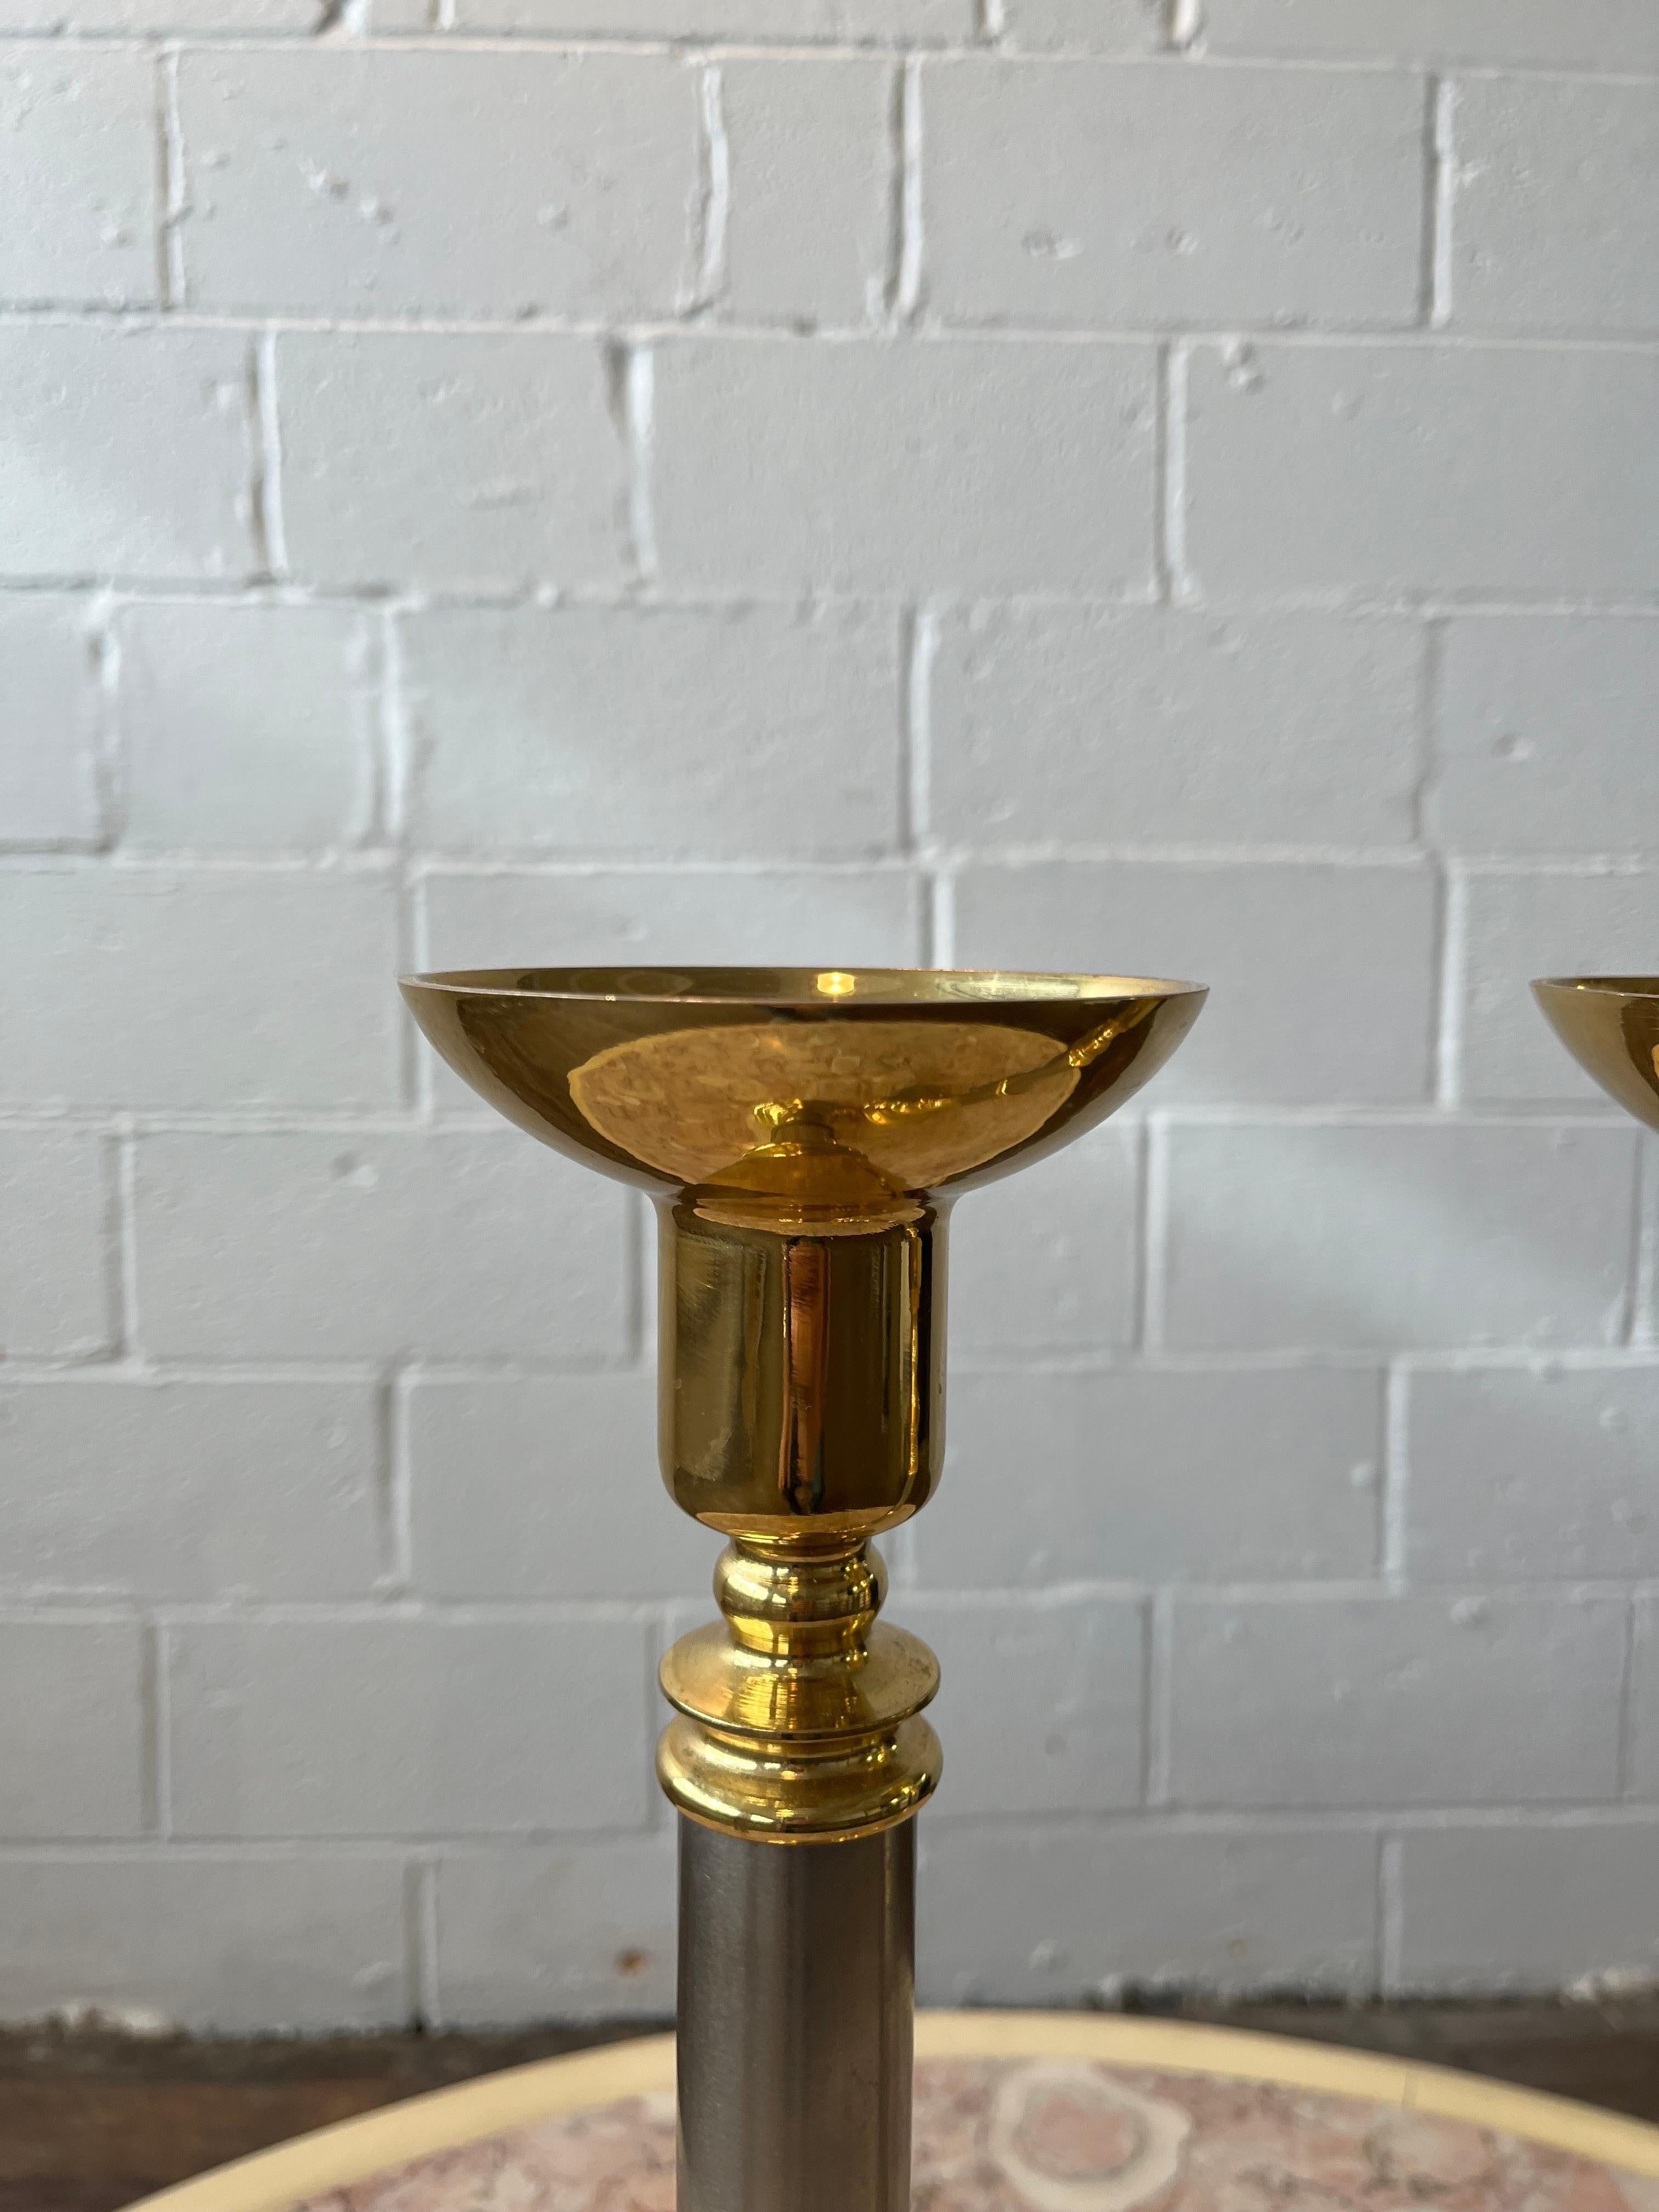 20th Century 1970's Candle Holders Neoclassical Brass and Chrome Candle Sticks - a Pair For Sale